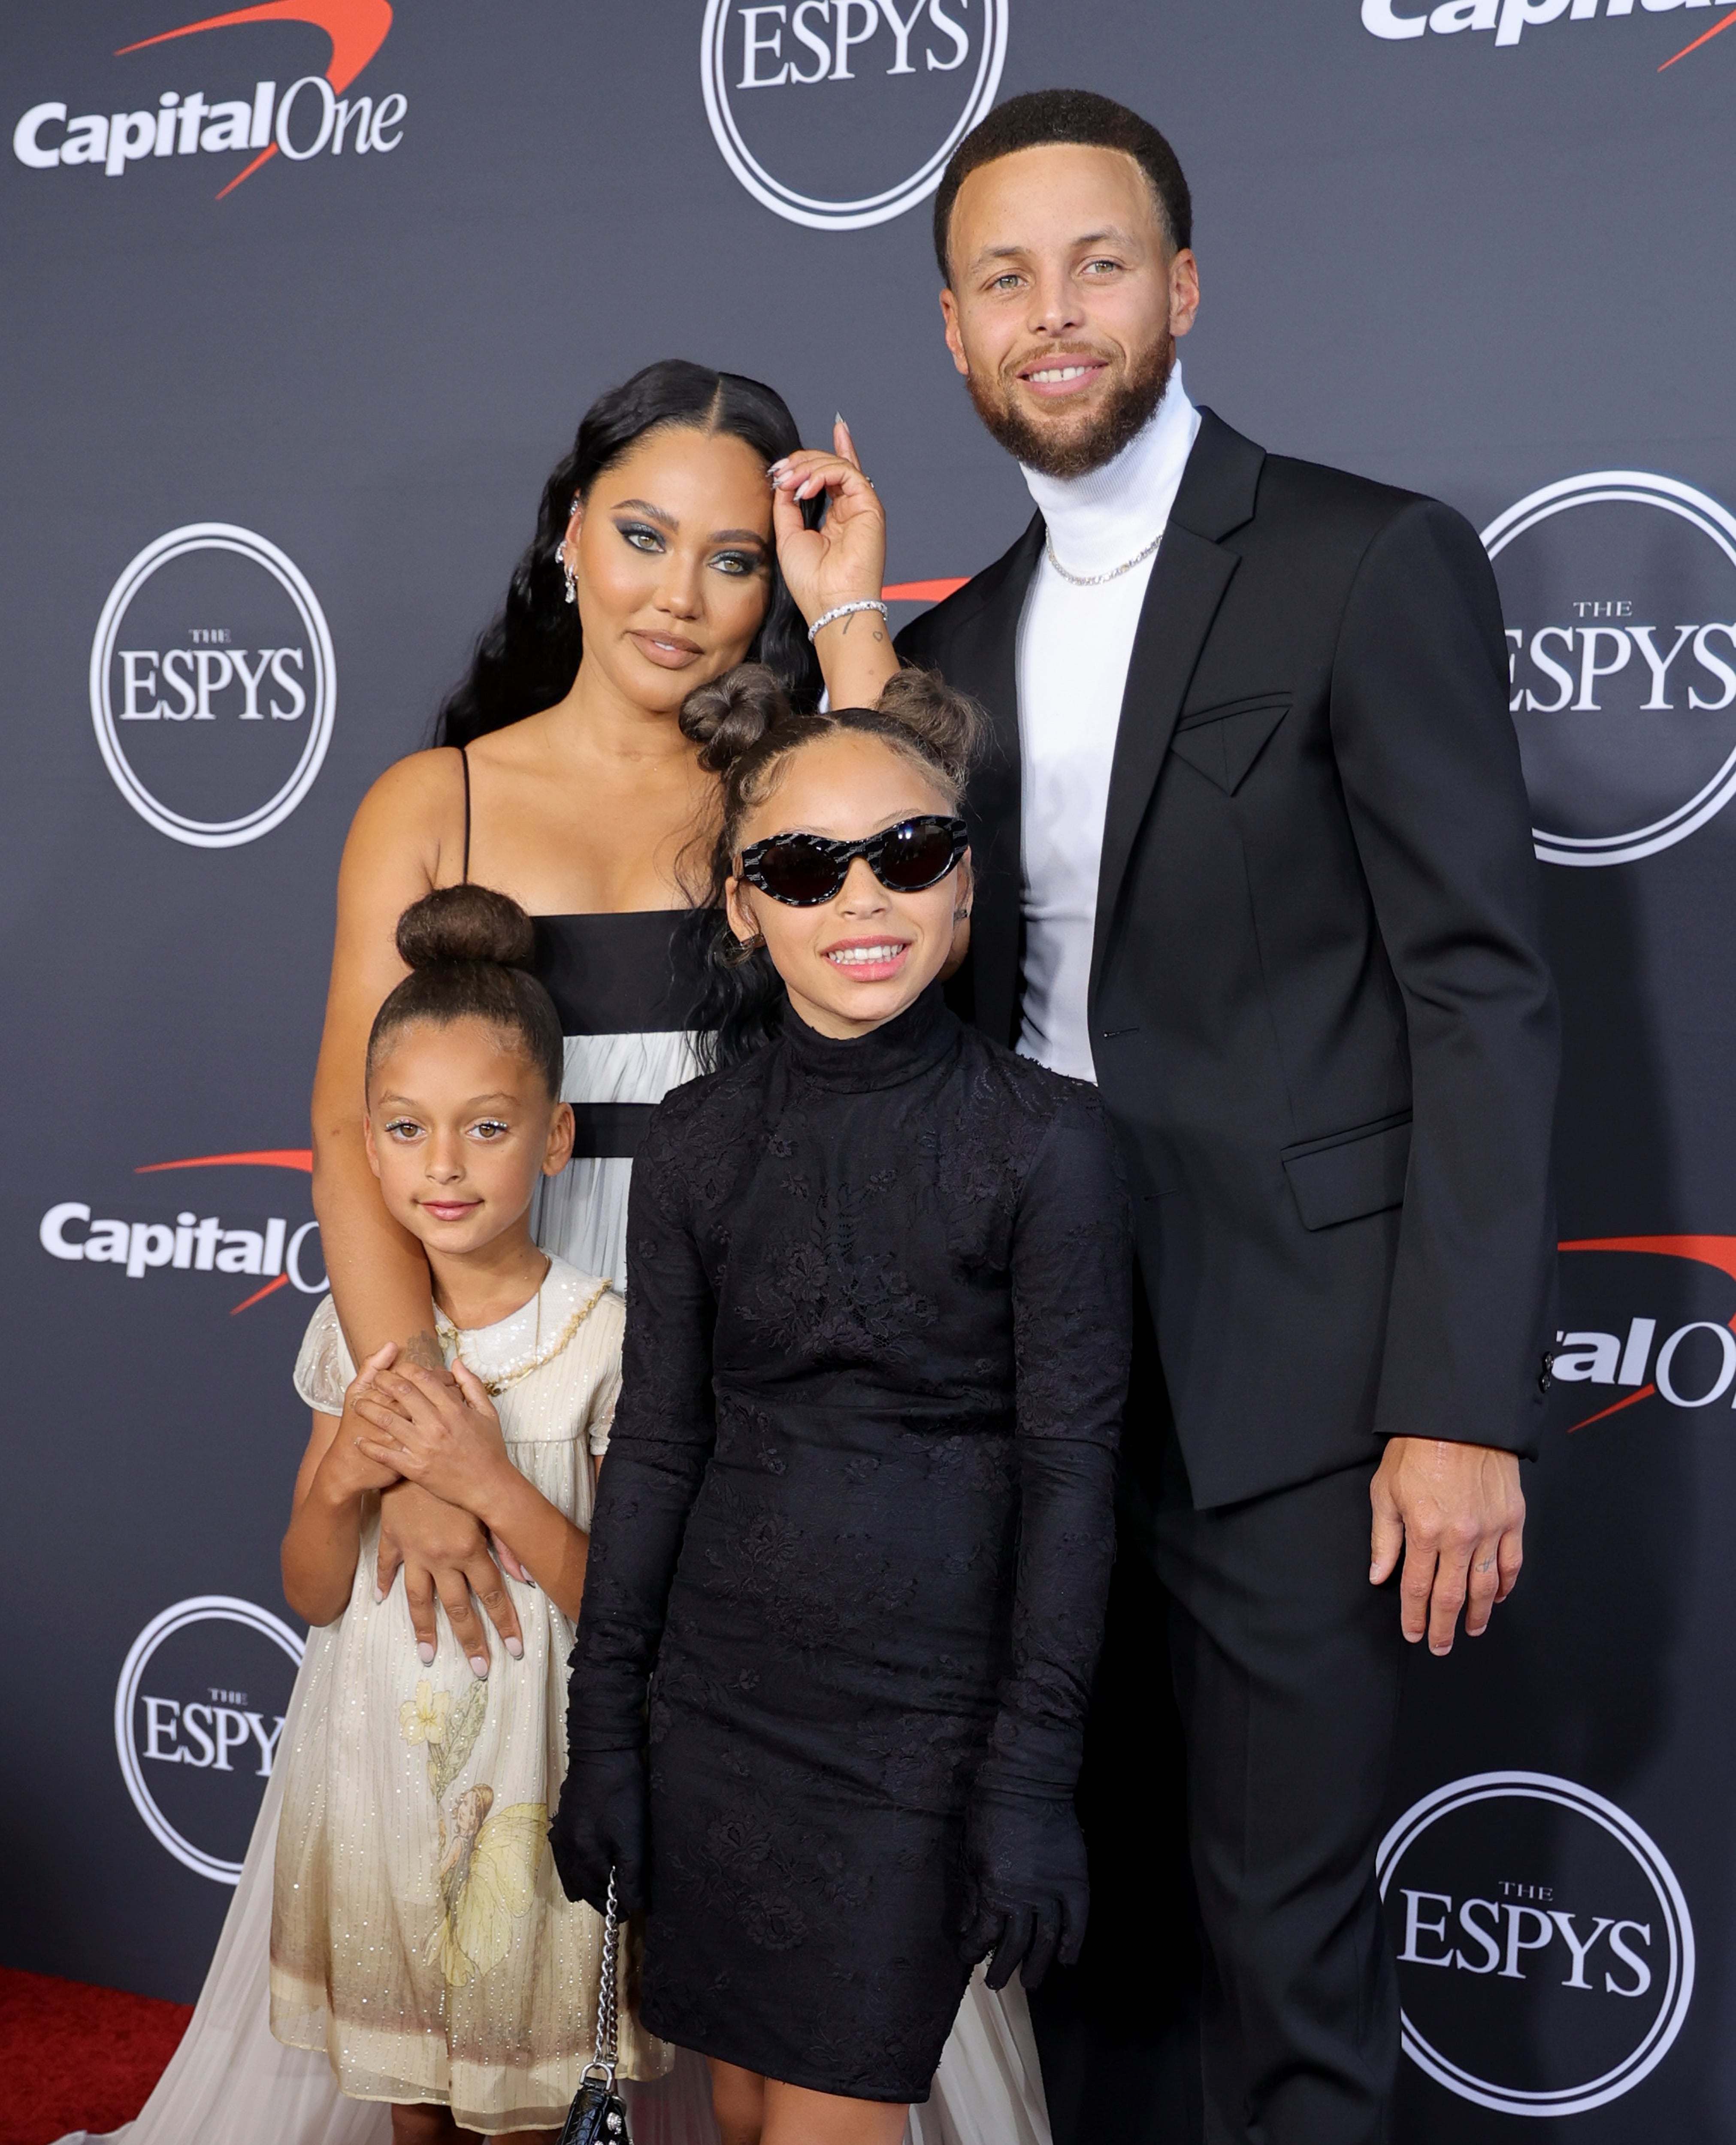 Sunday Conversation: The Currys (including Riley!) and The